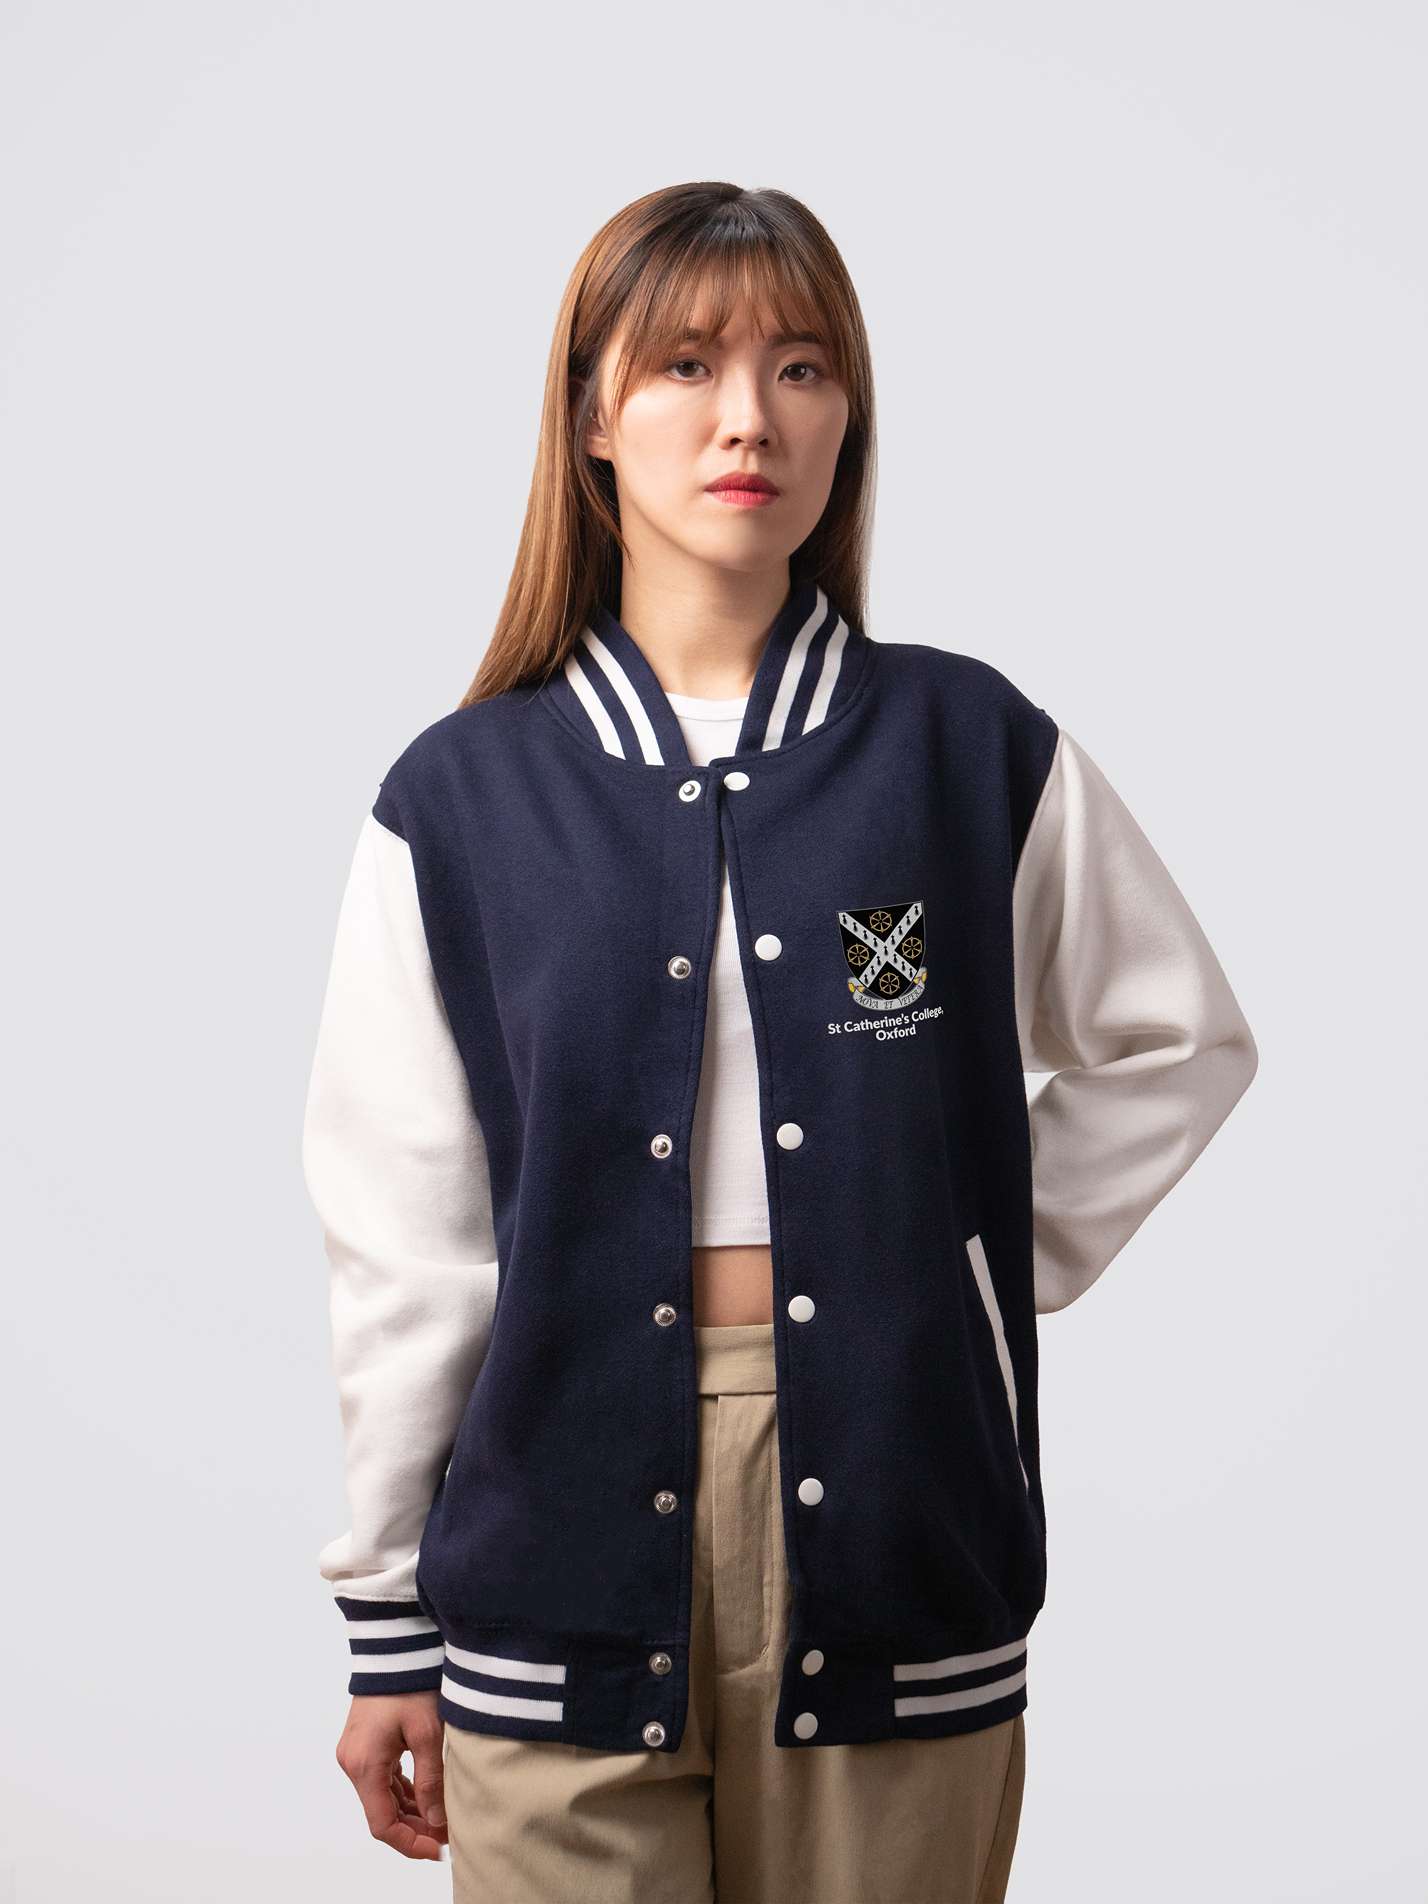 Retro style varsity jacket, with embroidered St Catherine's College crest